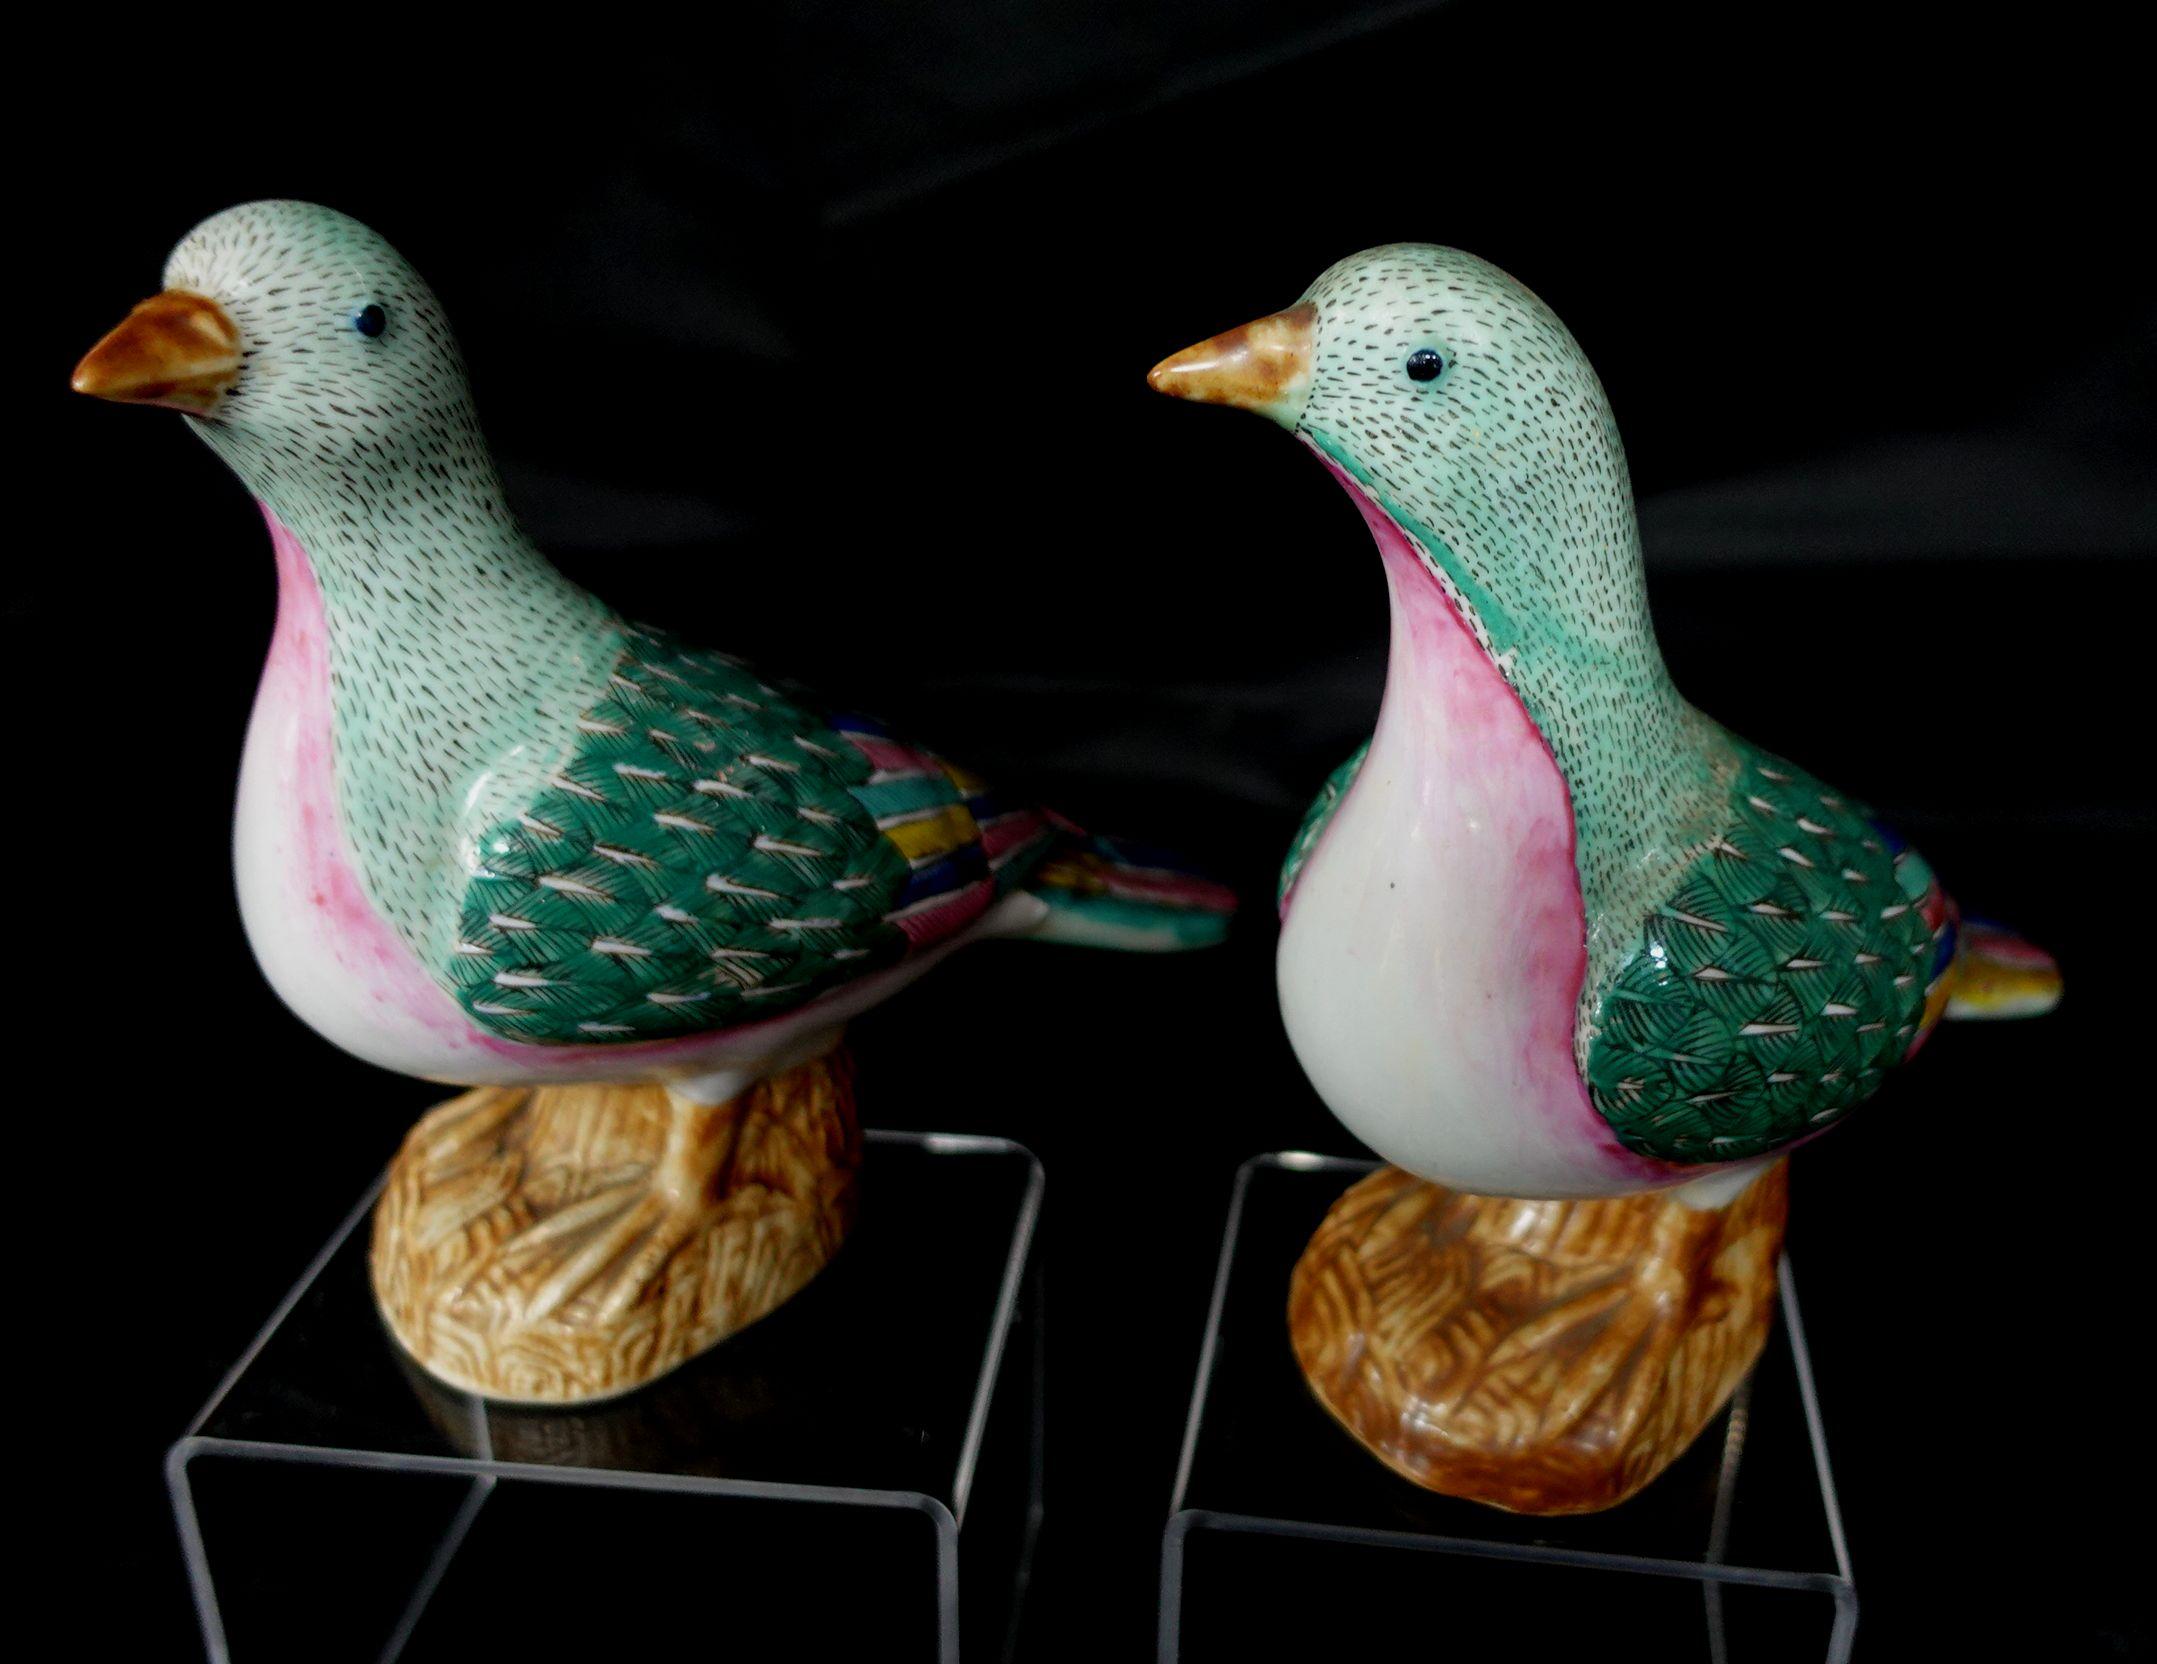 Pair of porcelain doves. China. early 20th century. Famille rose glaze. Measure: 7.25in high.